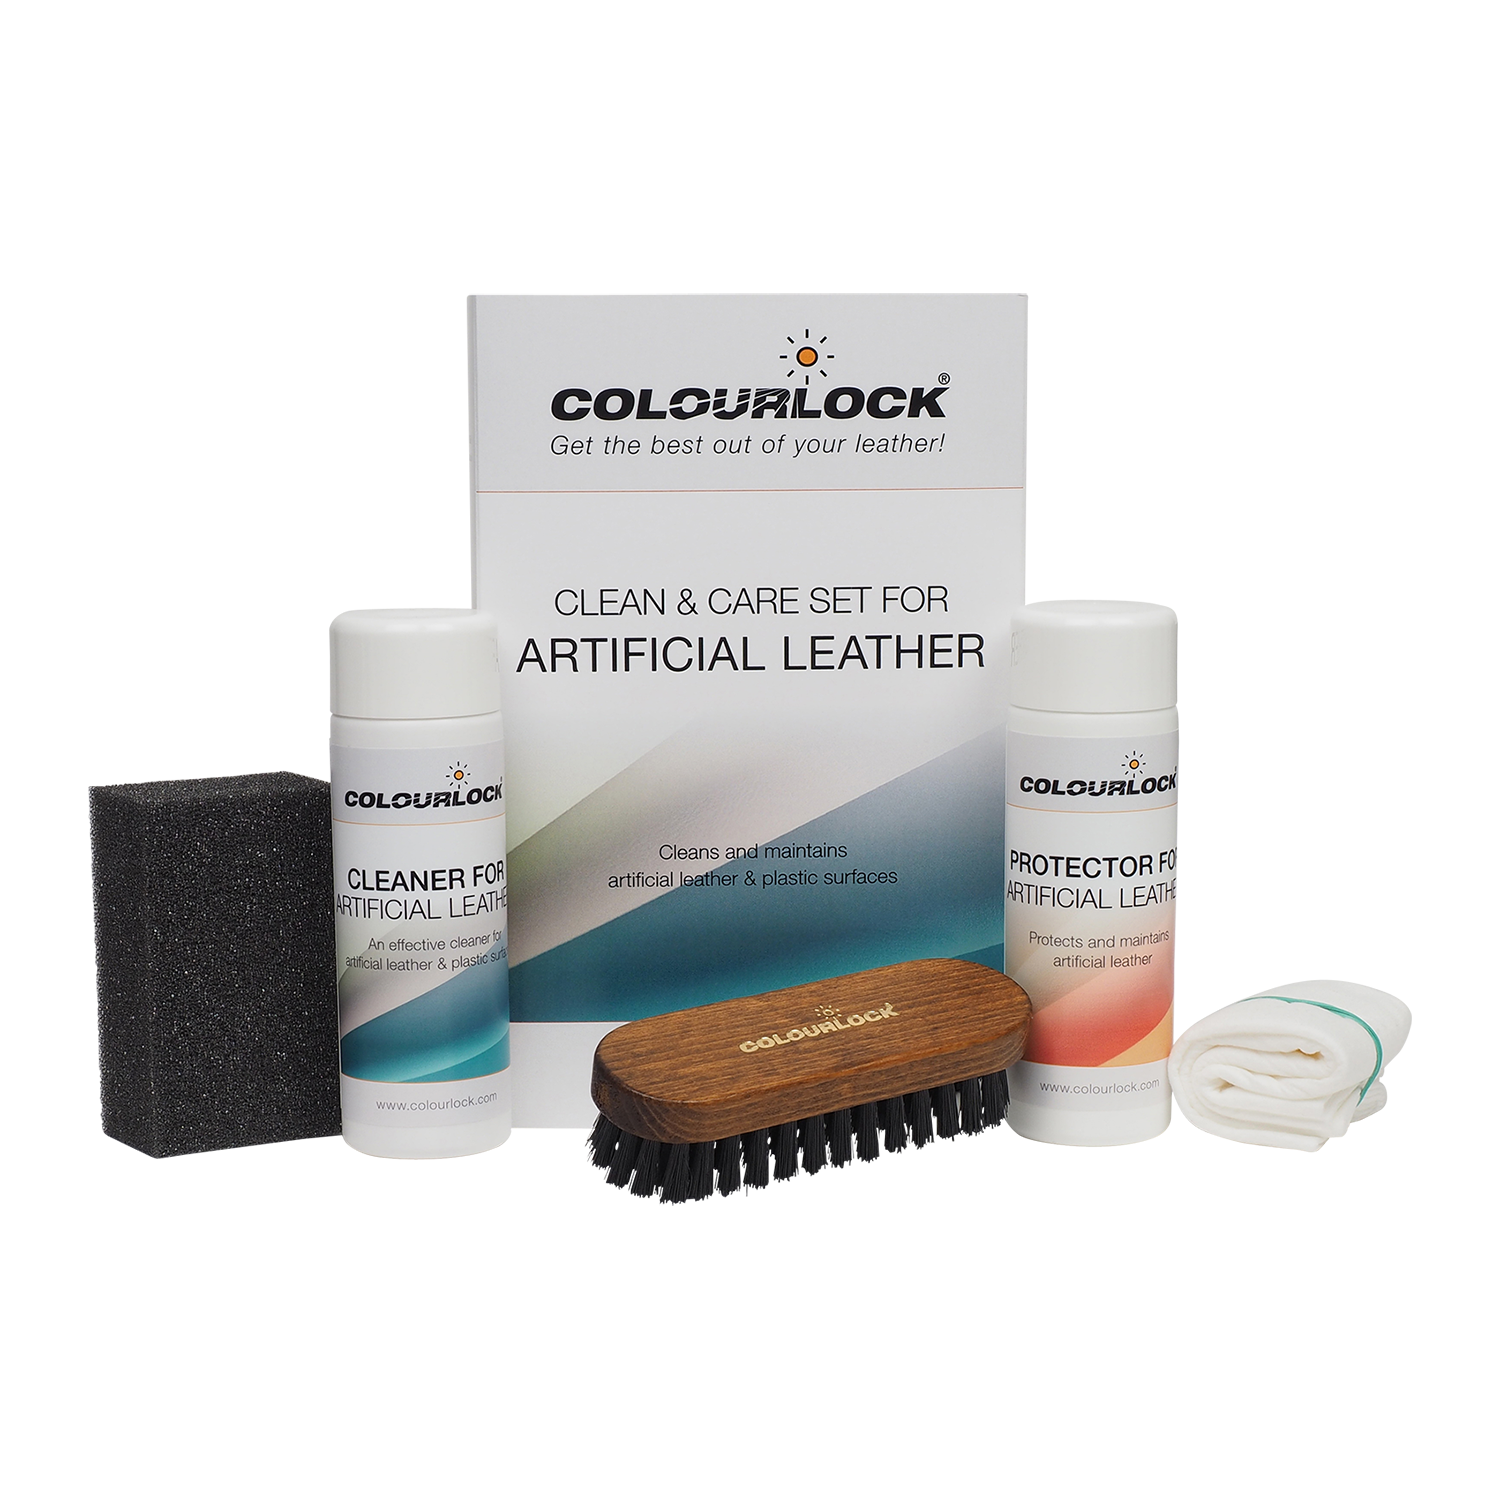 Colourlock Cleaning & Conditioning Kit for all Artificial Leather & Vinyl Surfaces